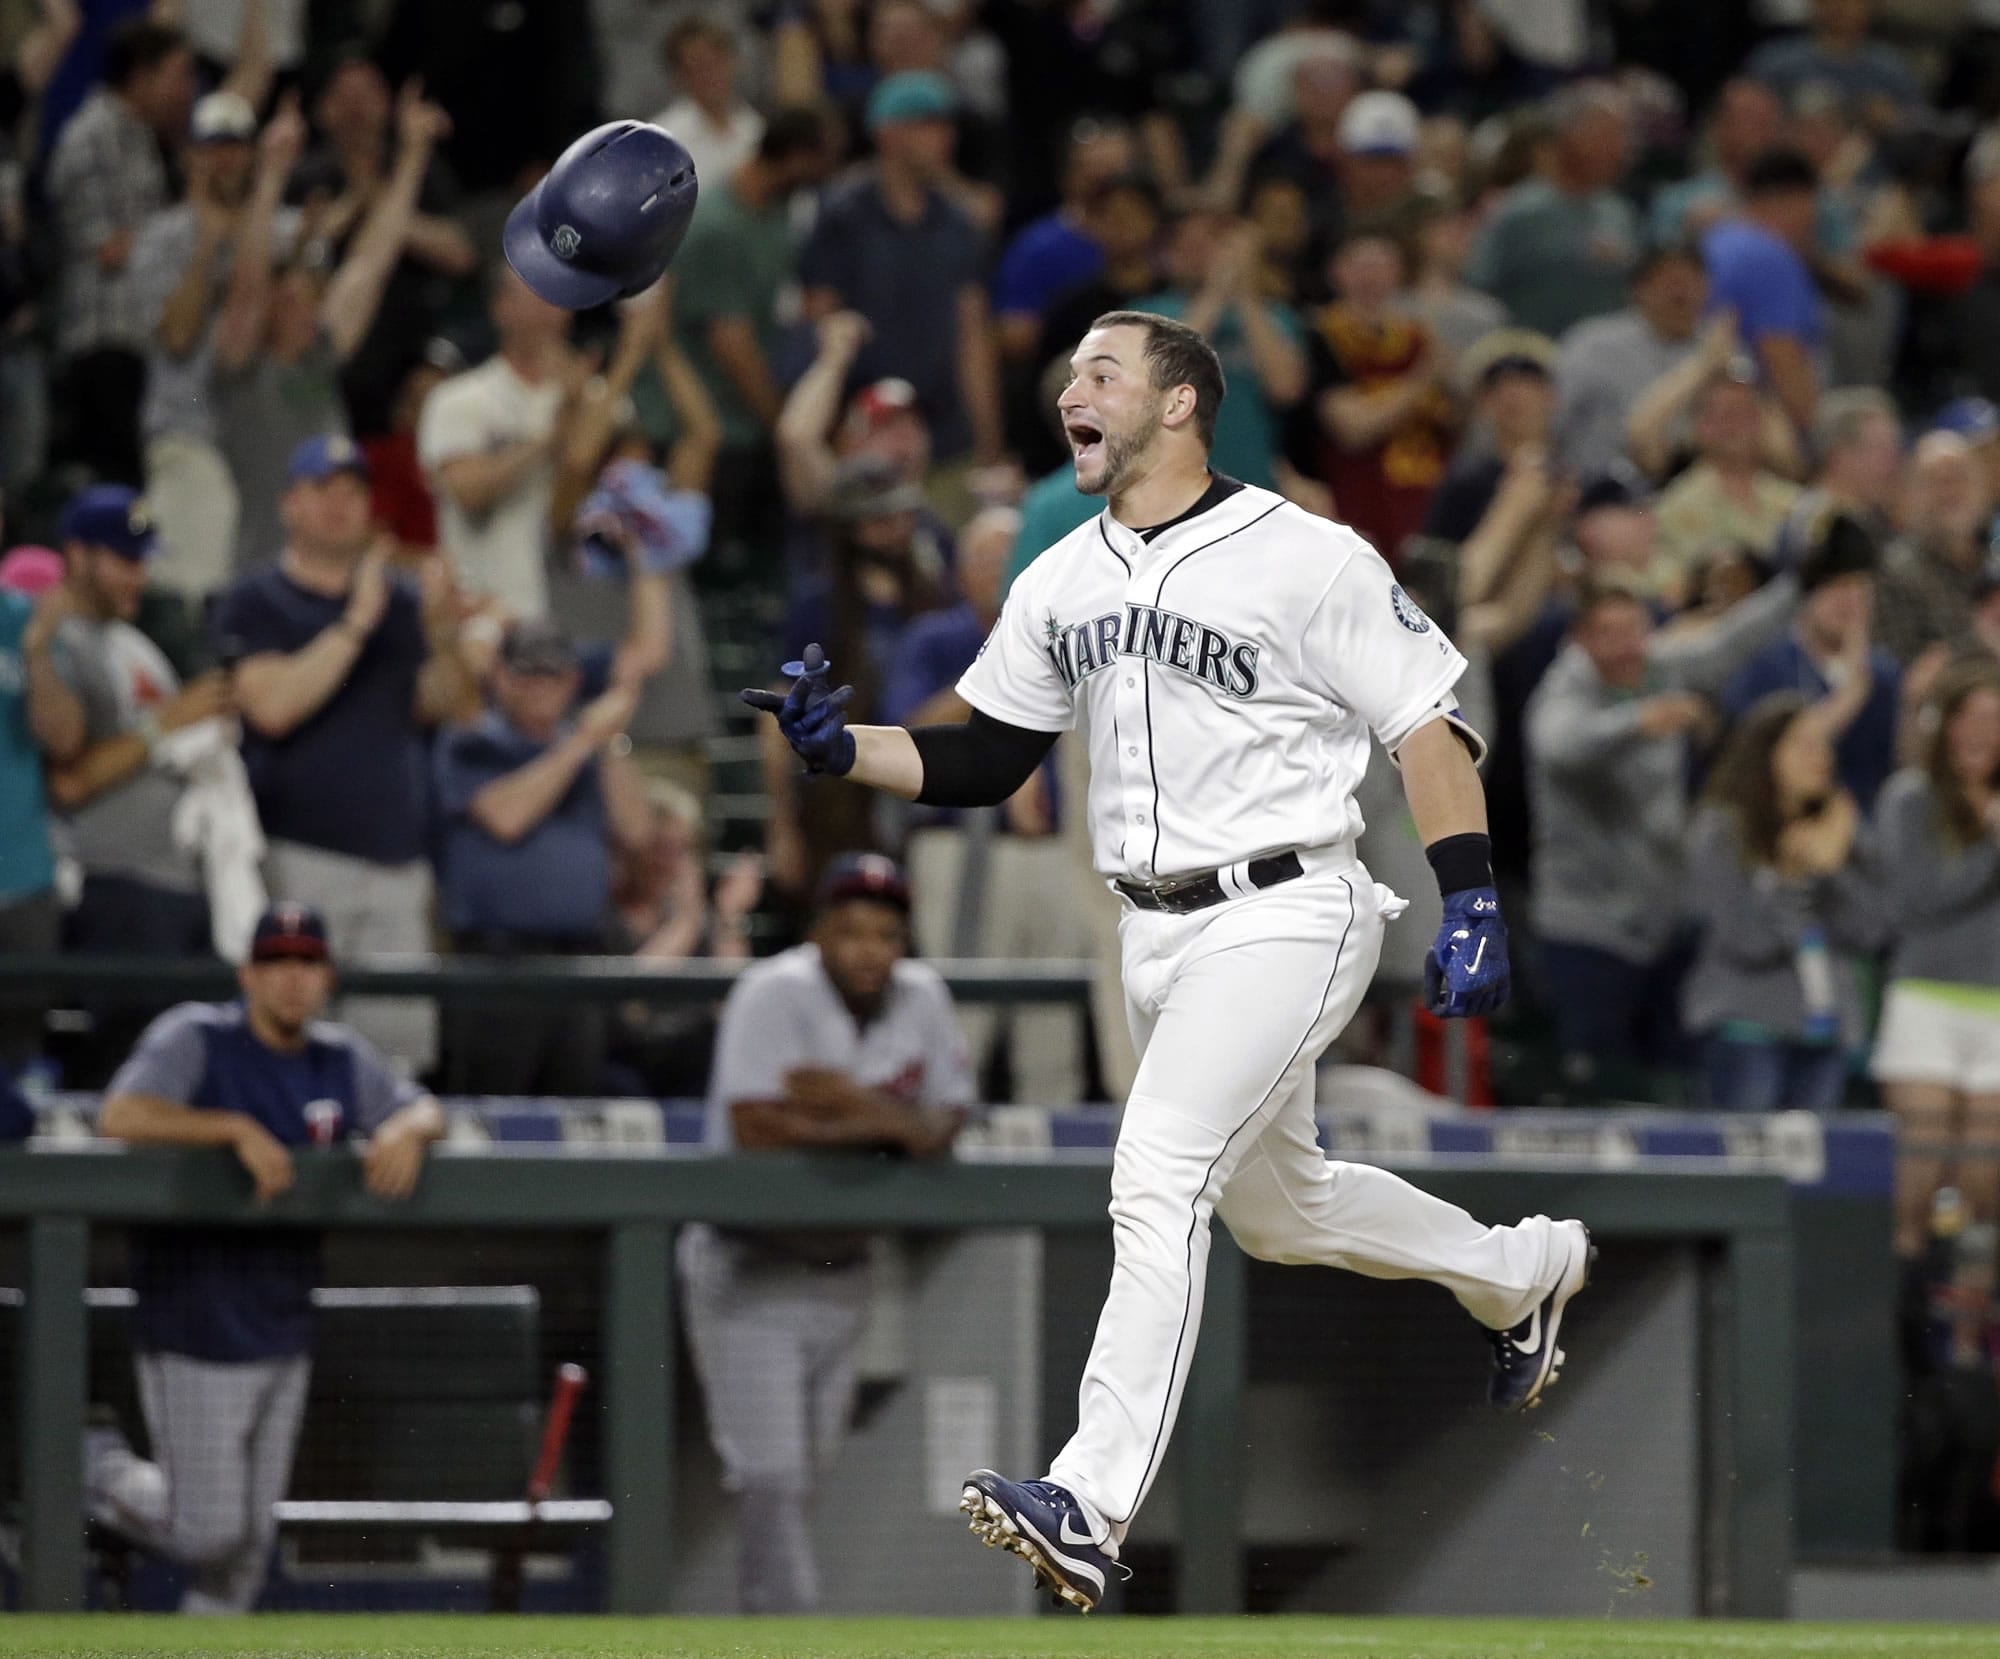 Seattle Mariners' Mike Zunino tosses his batting helmet as he heads home on his two-run home run, scoring the winning run against the Minnesota Twins in the ninth inning of a baseball game Wednesday, June 7, 2017, in Seattle. The Mariners won 6-5.